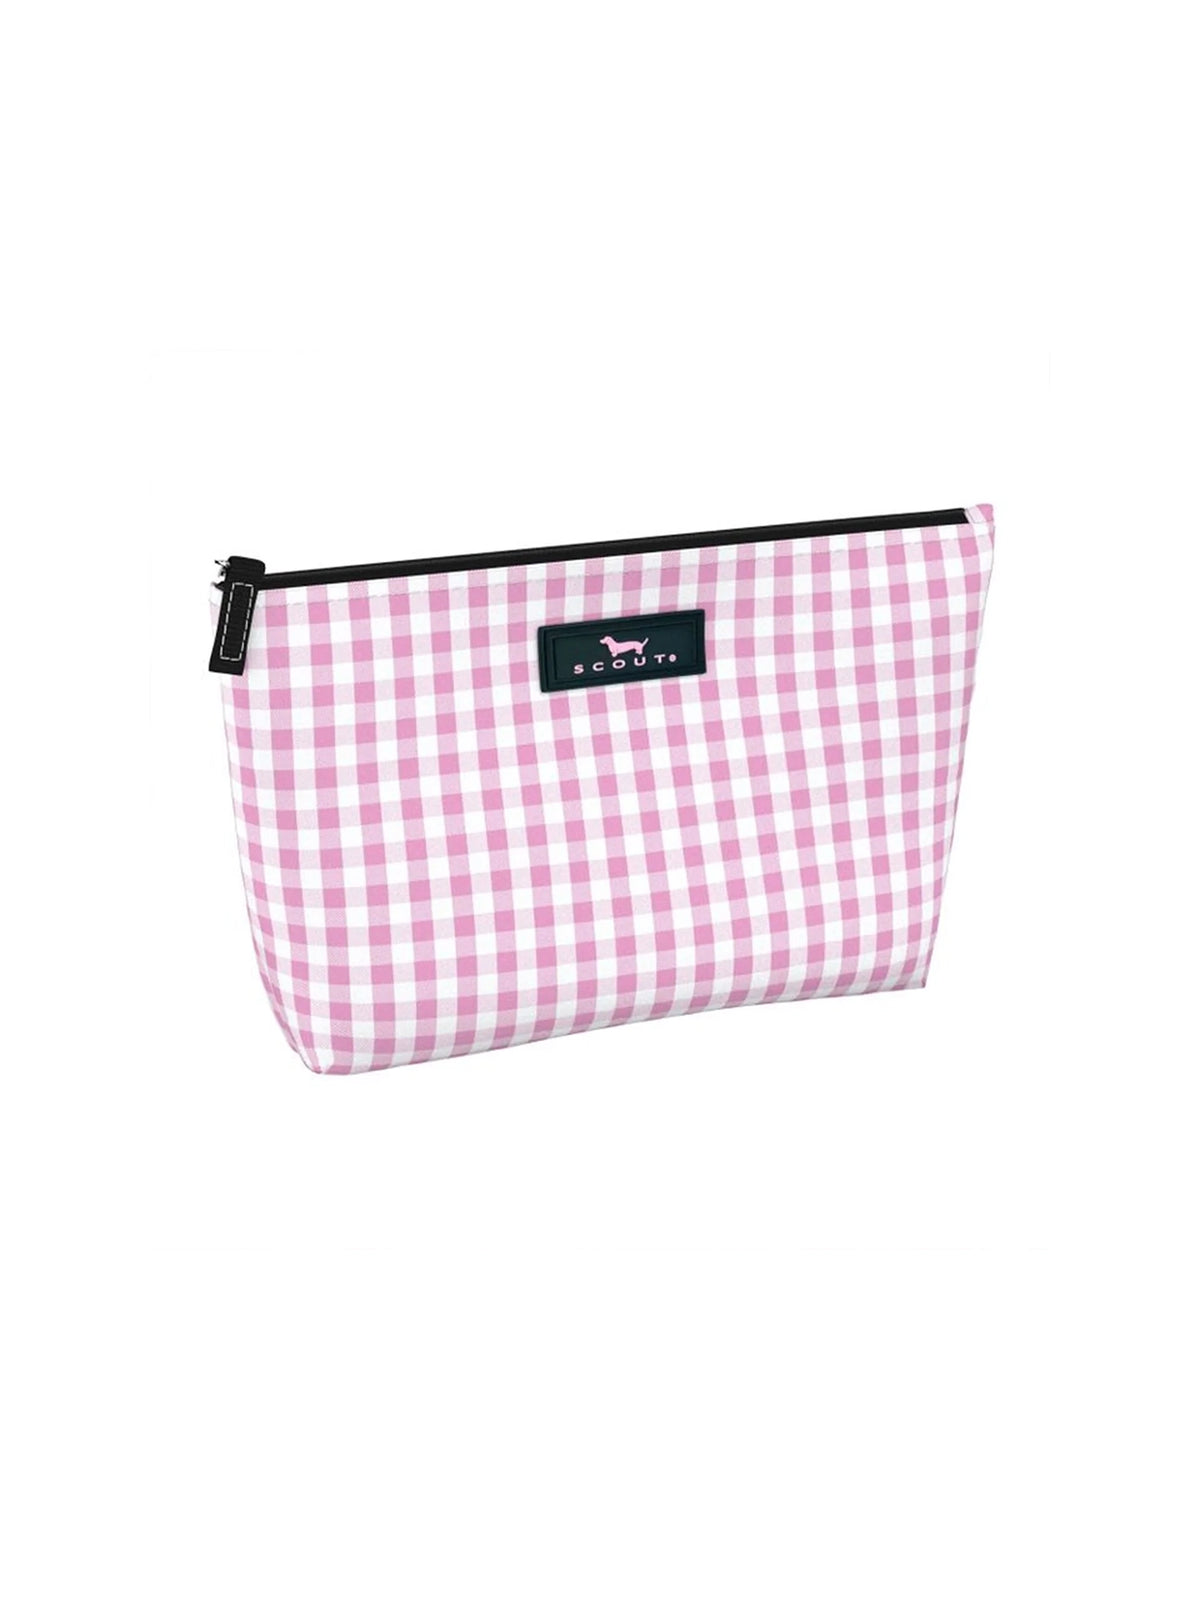 SCOUT twiggy makeup bag in victoria checkham print